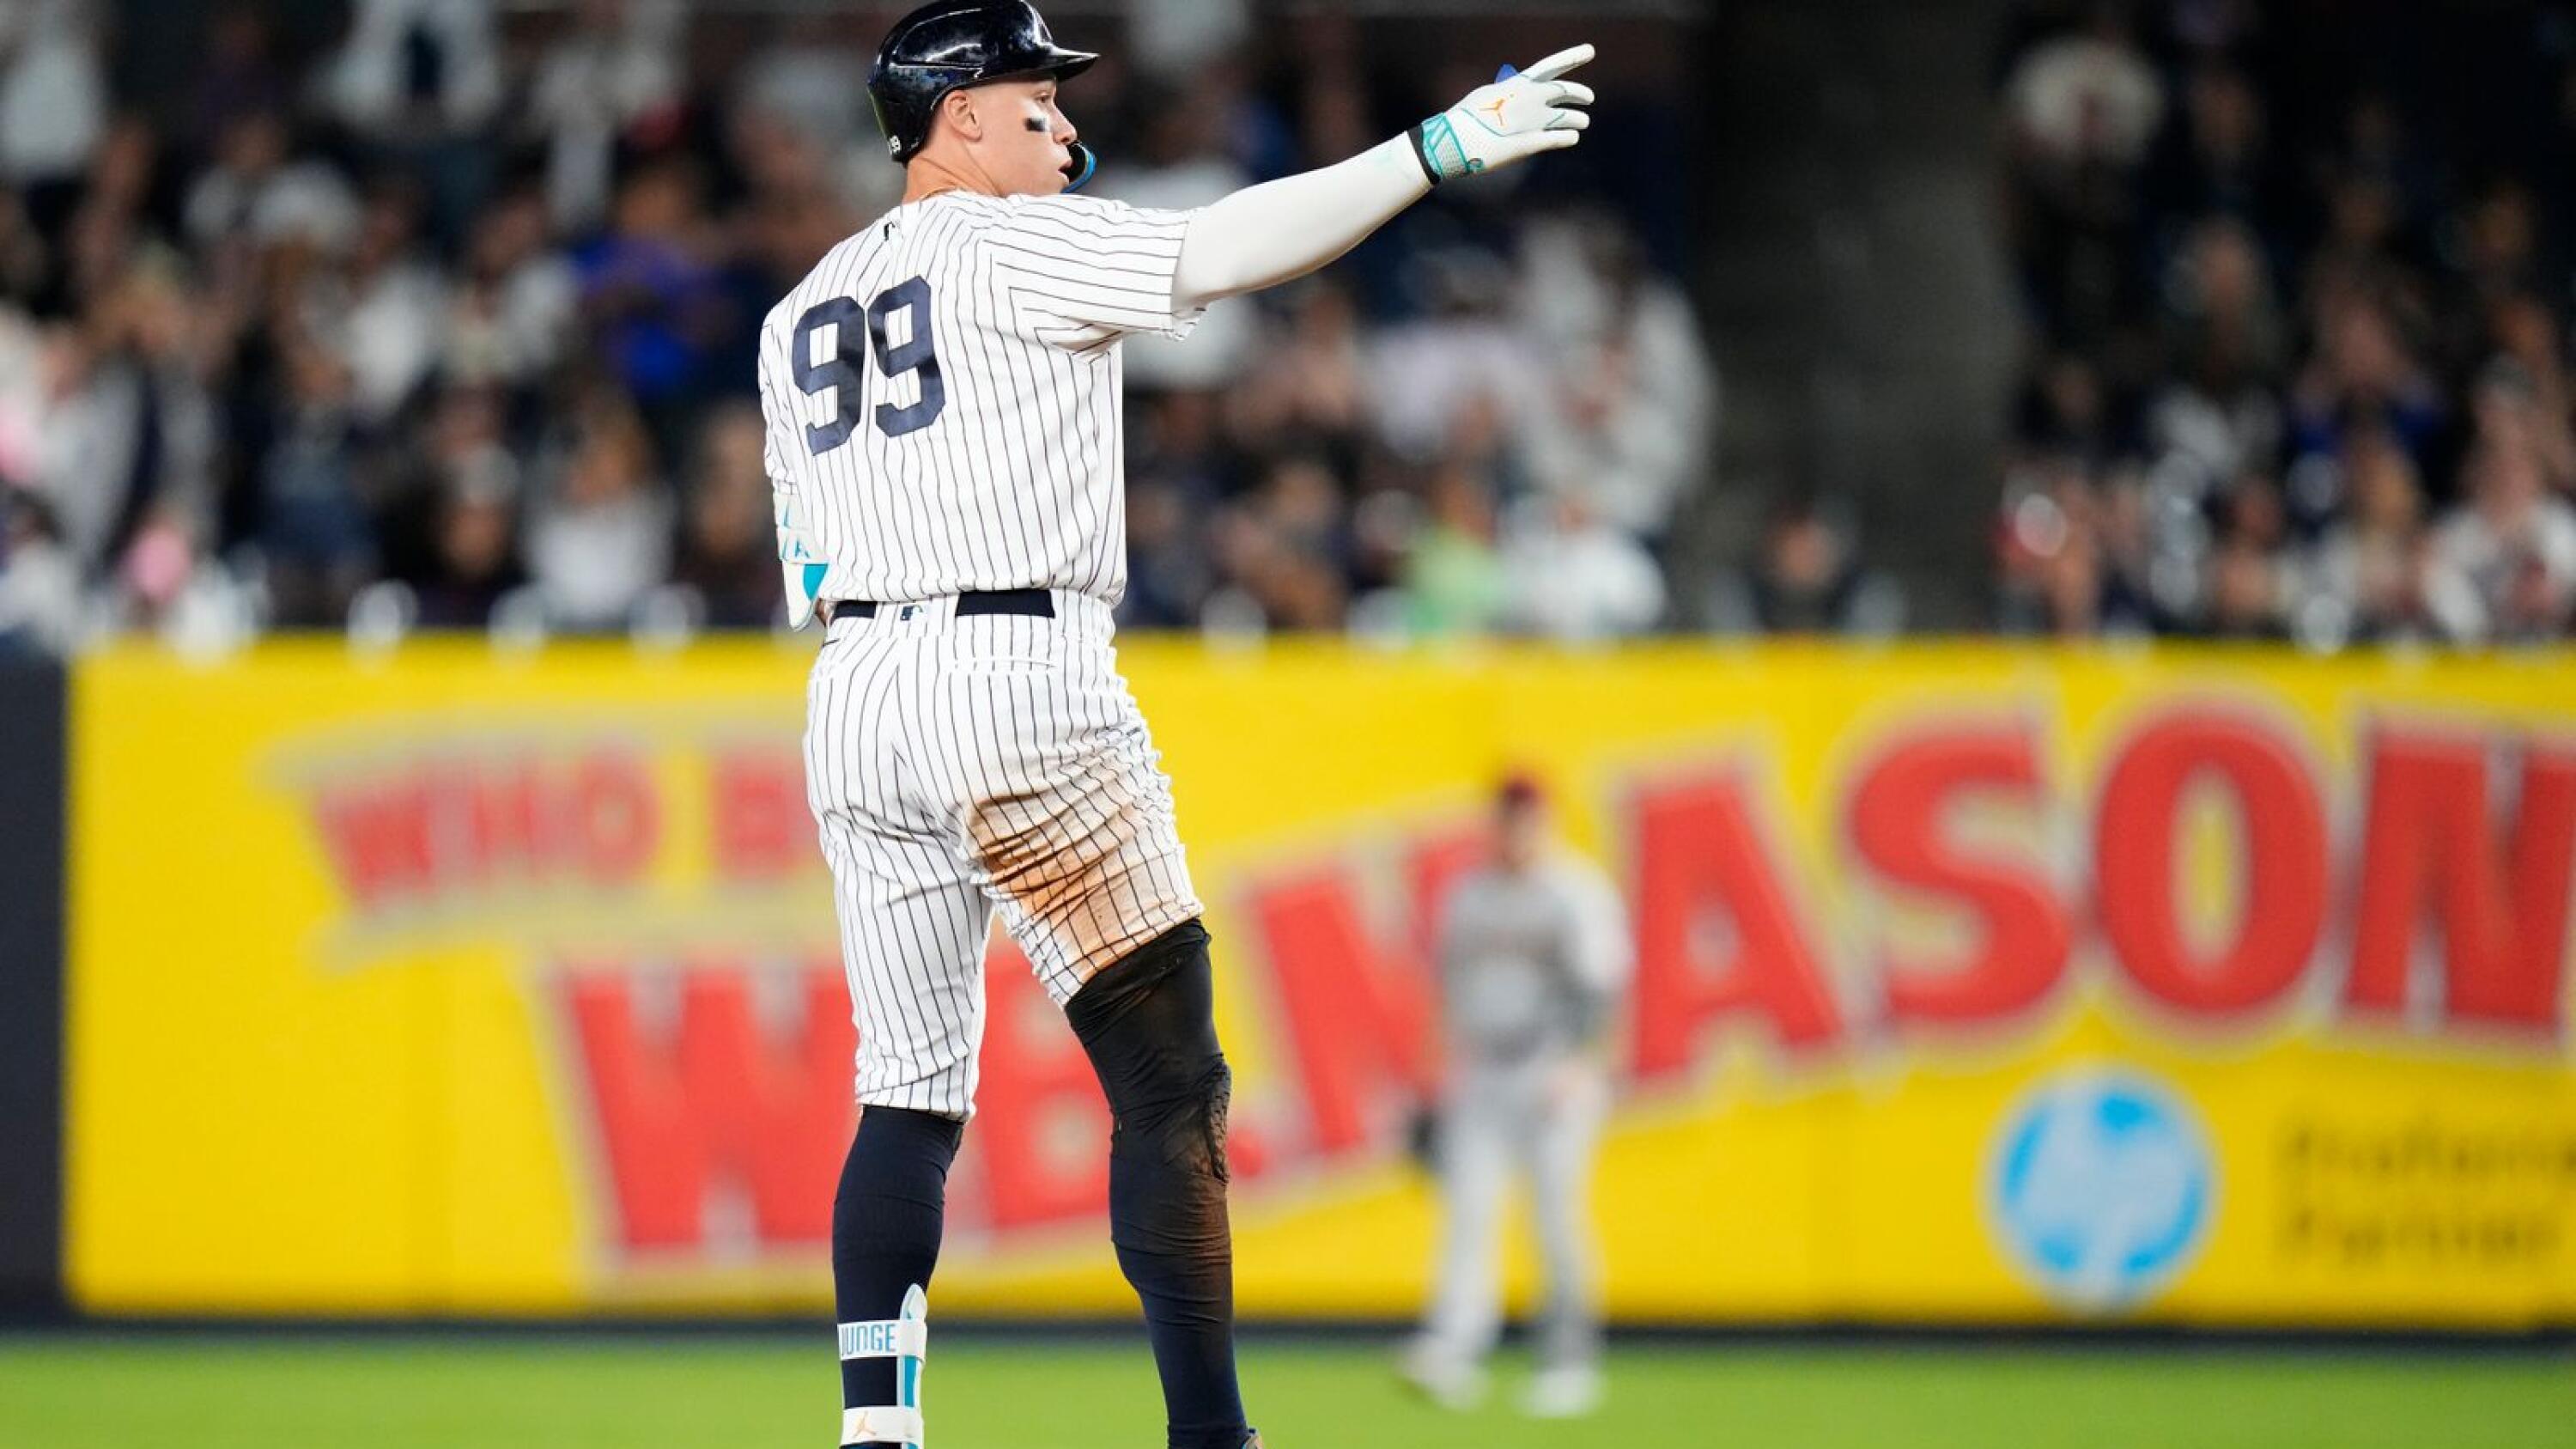 Yankees win Saturday, big day for Aaron Judge on deck